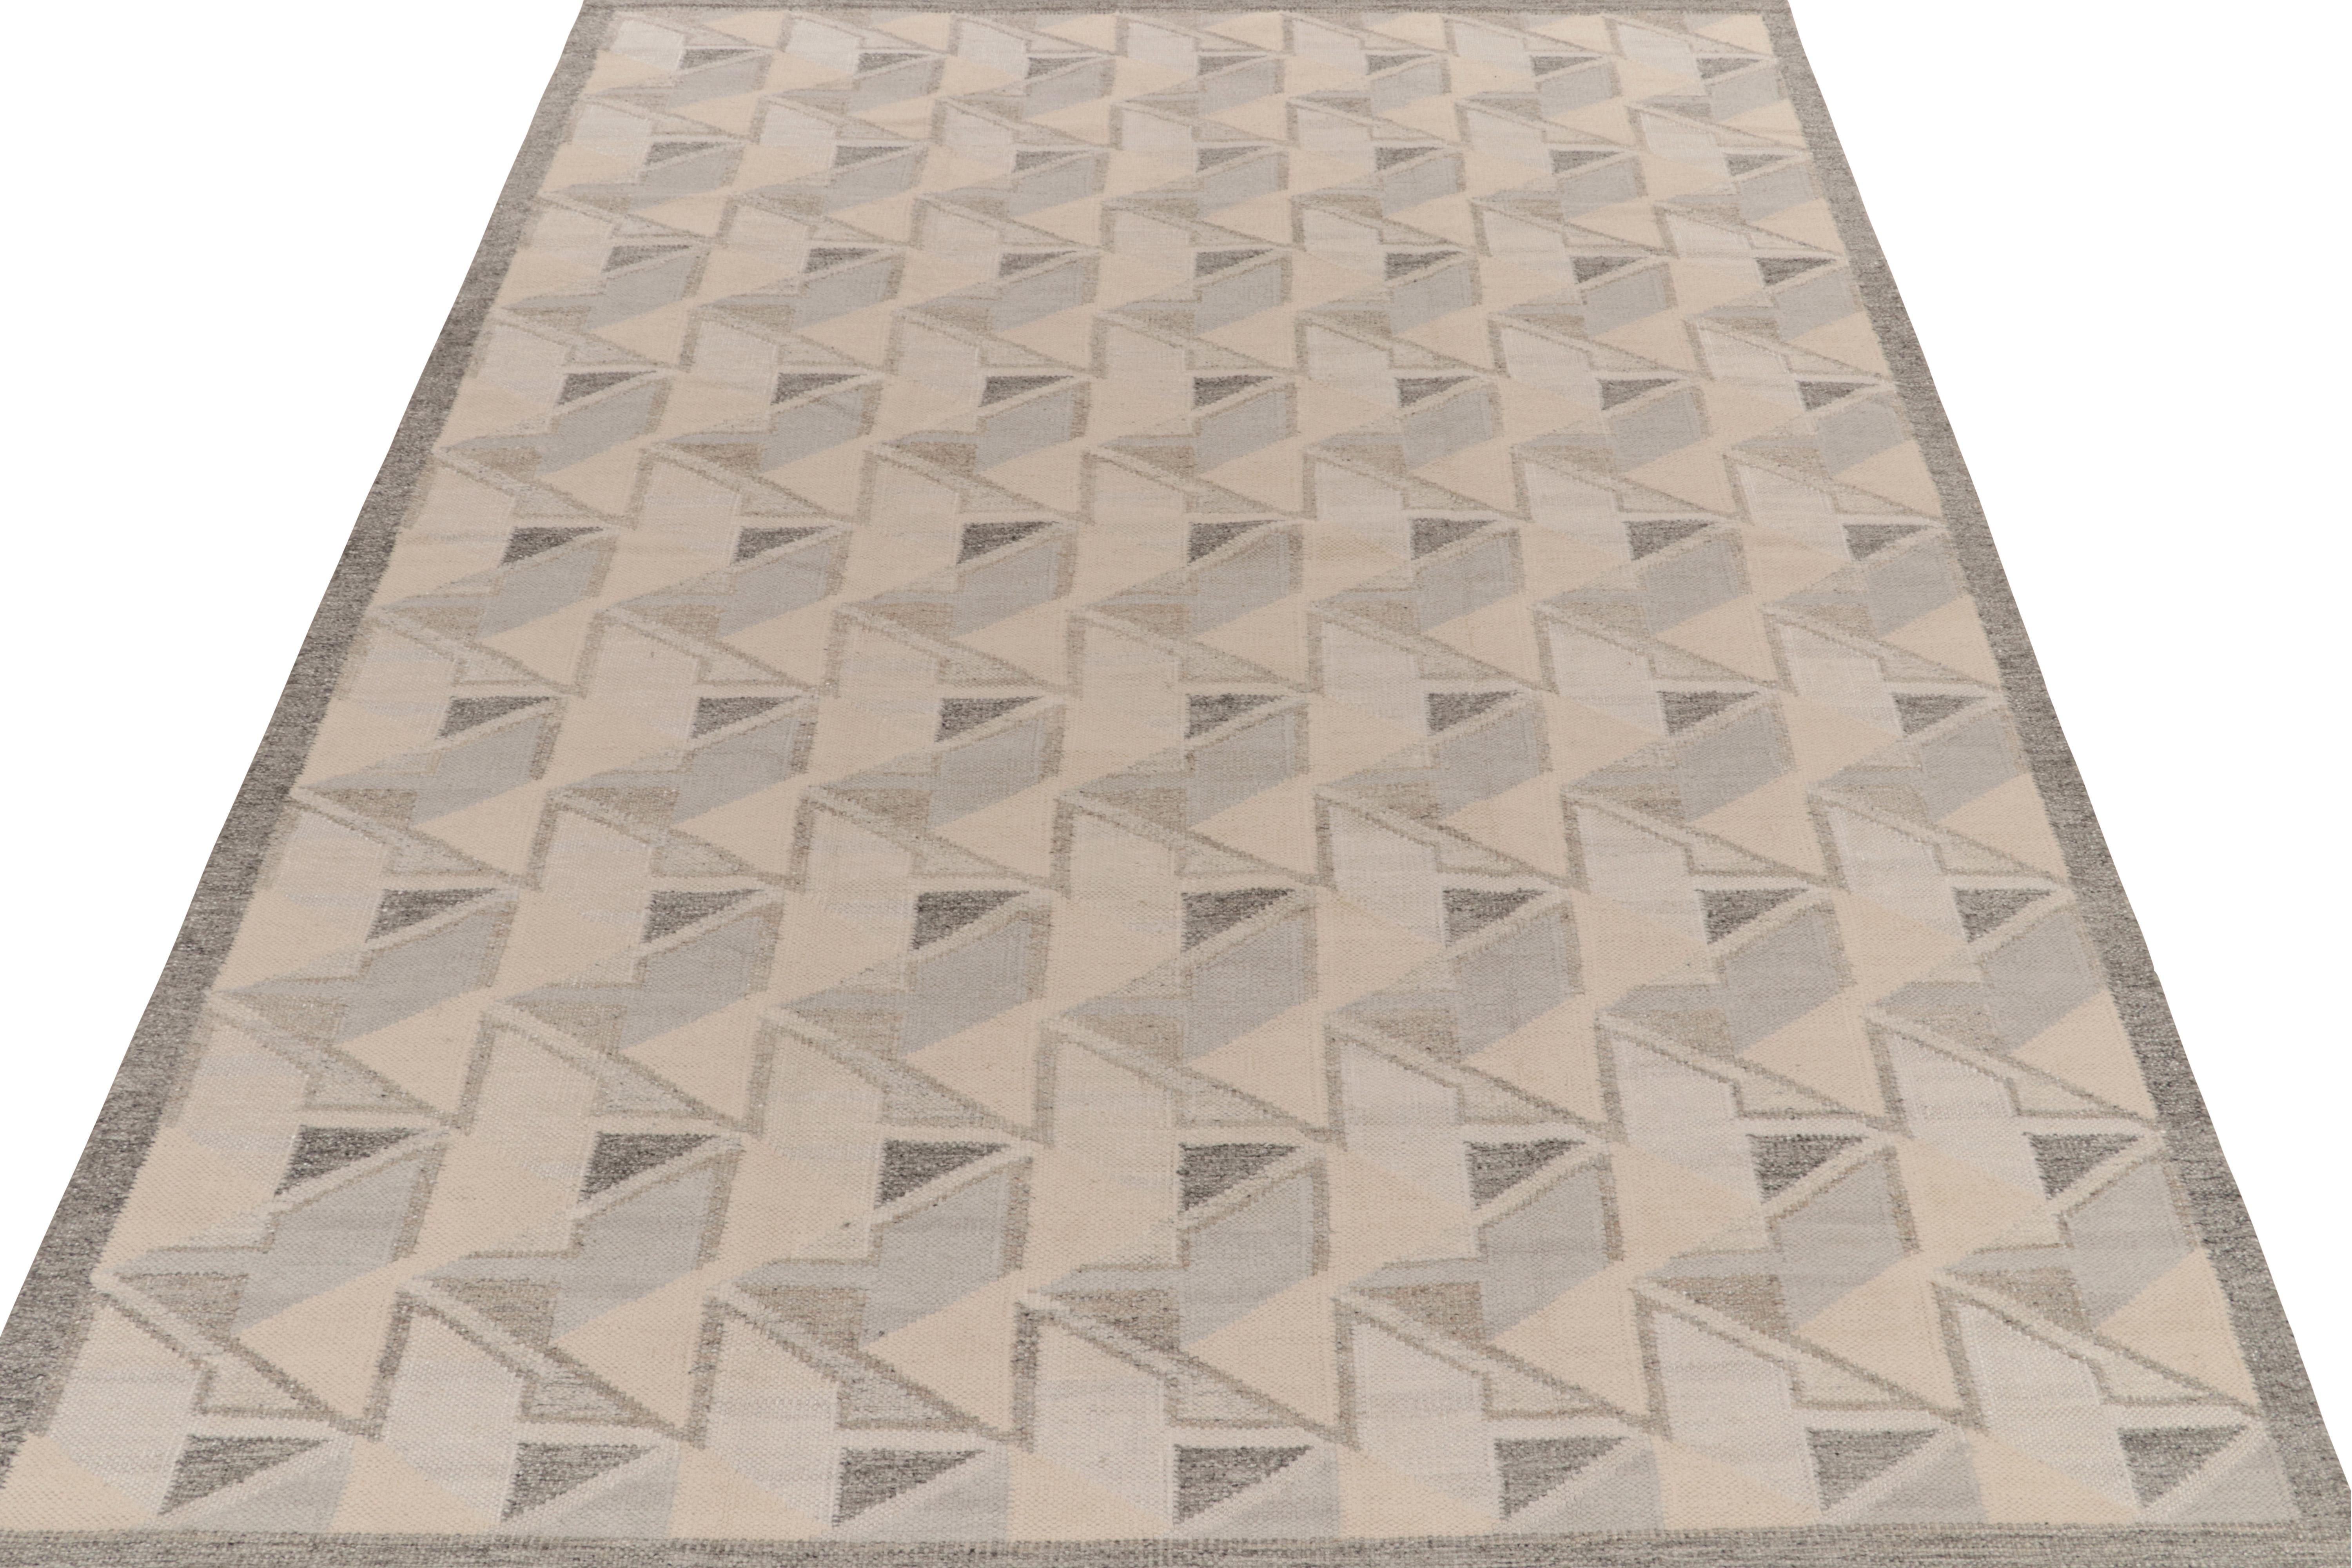 Rug & Kilim’s 8x12 Scandinavian style kilim rug, from our celebrated Swedish Deco-style flatweave collection. 

On the Design: This area rug enjoys a take on mid-century modern aesthetics with a smart geometric pattern casting an 3D impression in